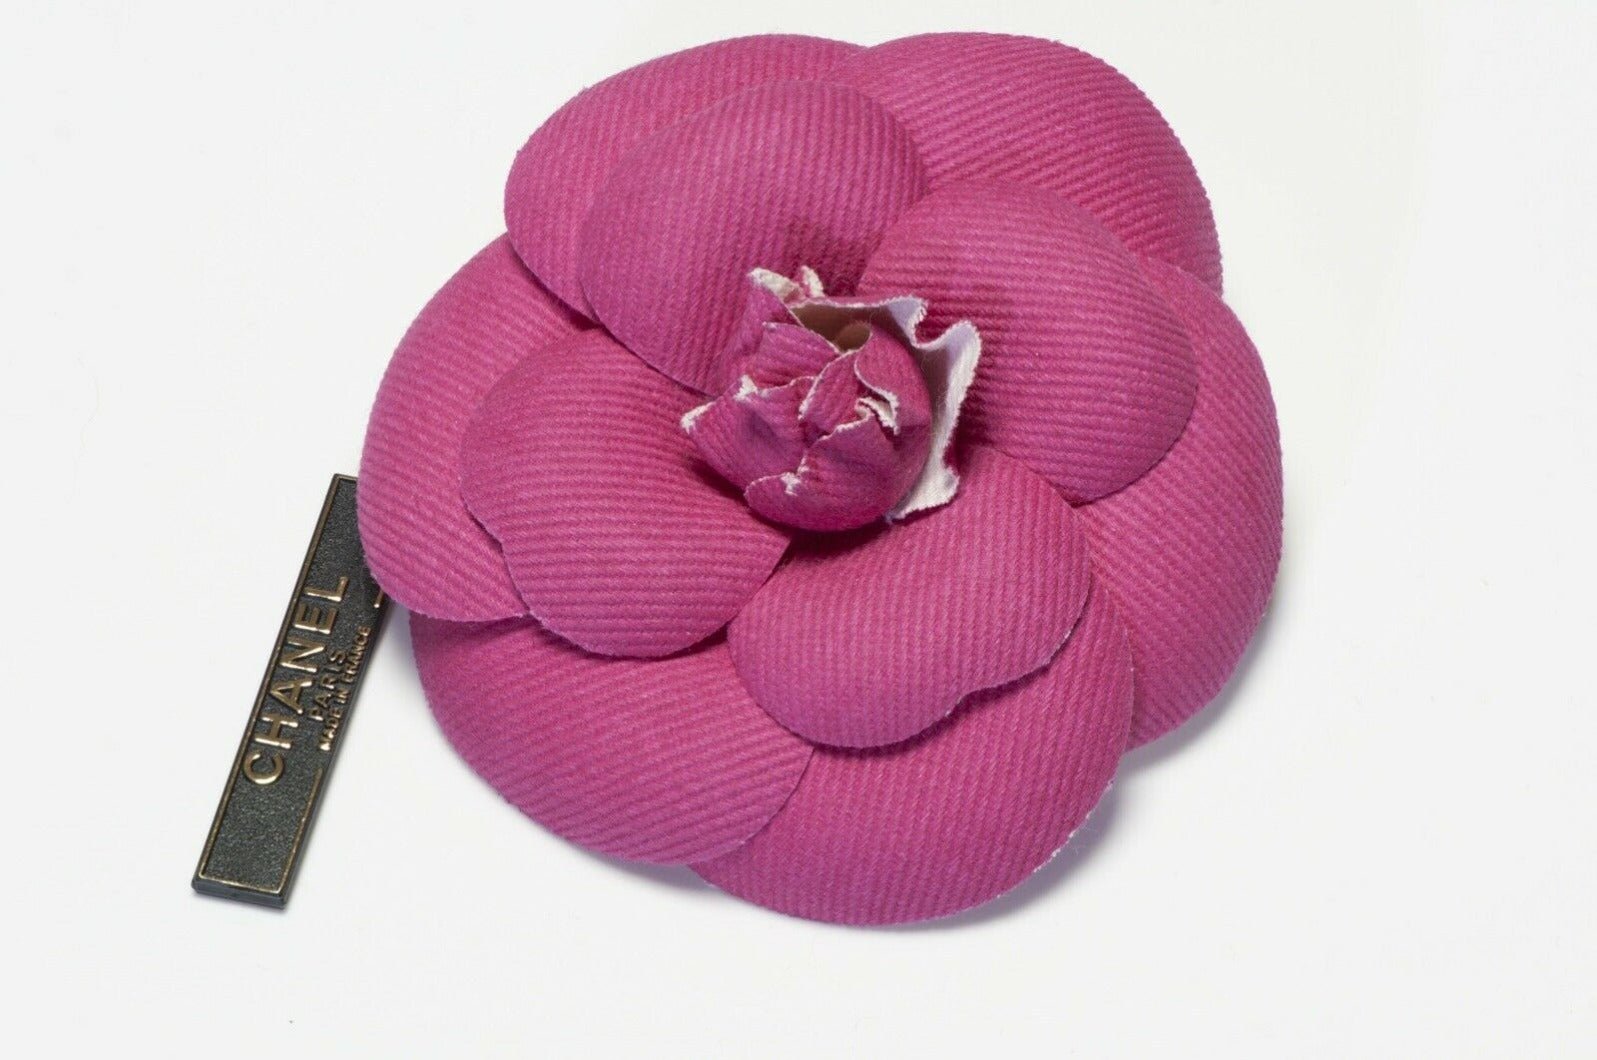 CHANEL Paris 1990’s Pink Fabric Camellia Flower Brooch - DSF Antique Jewelry